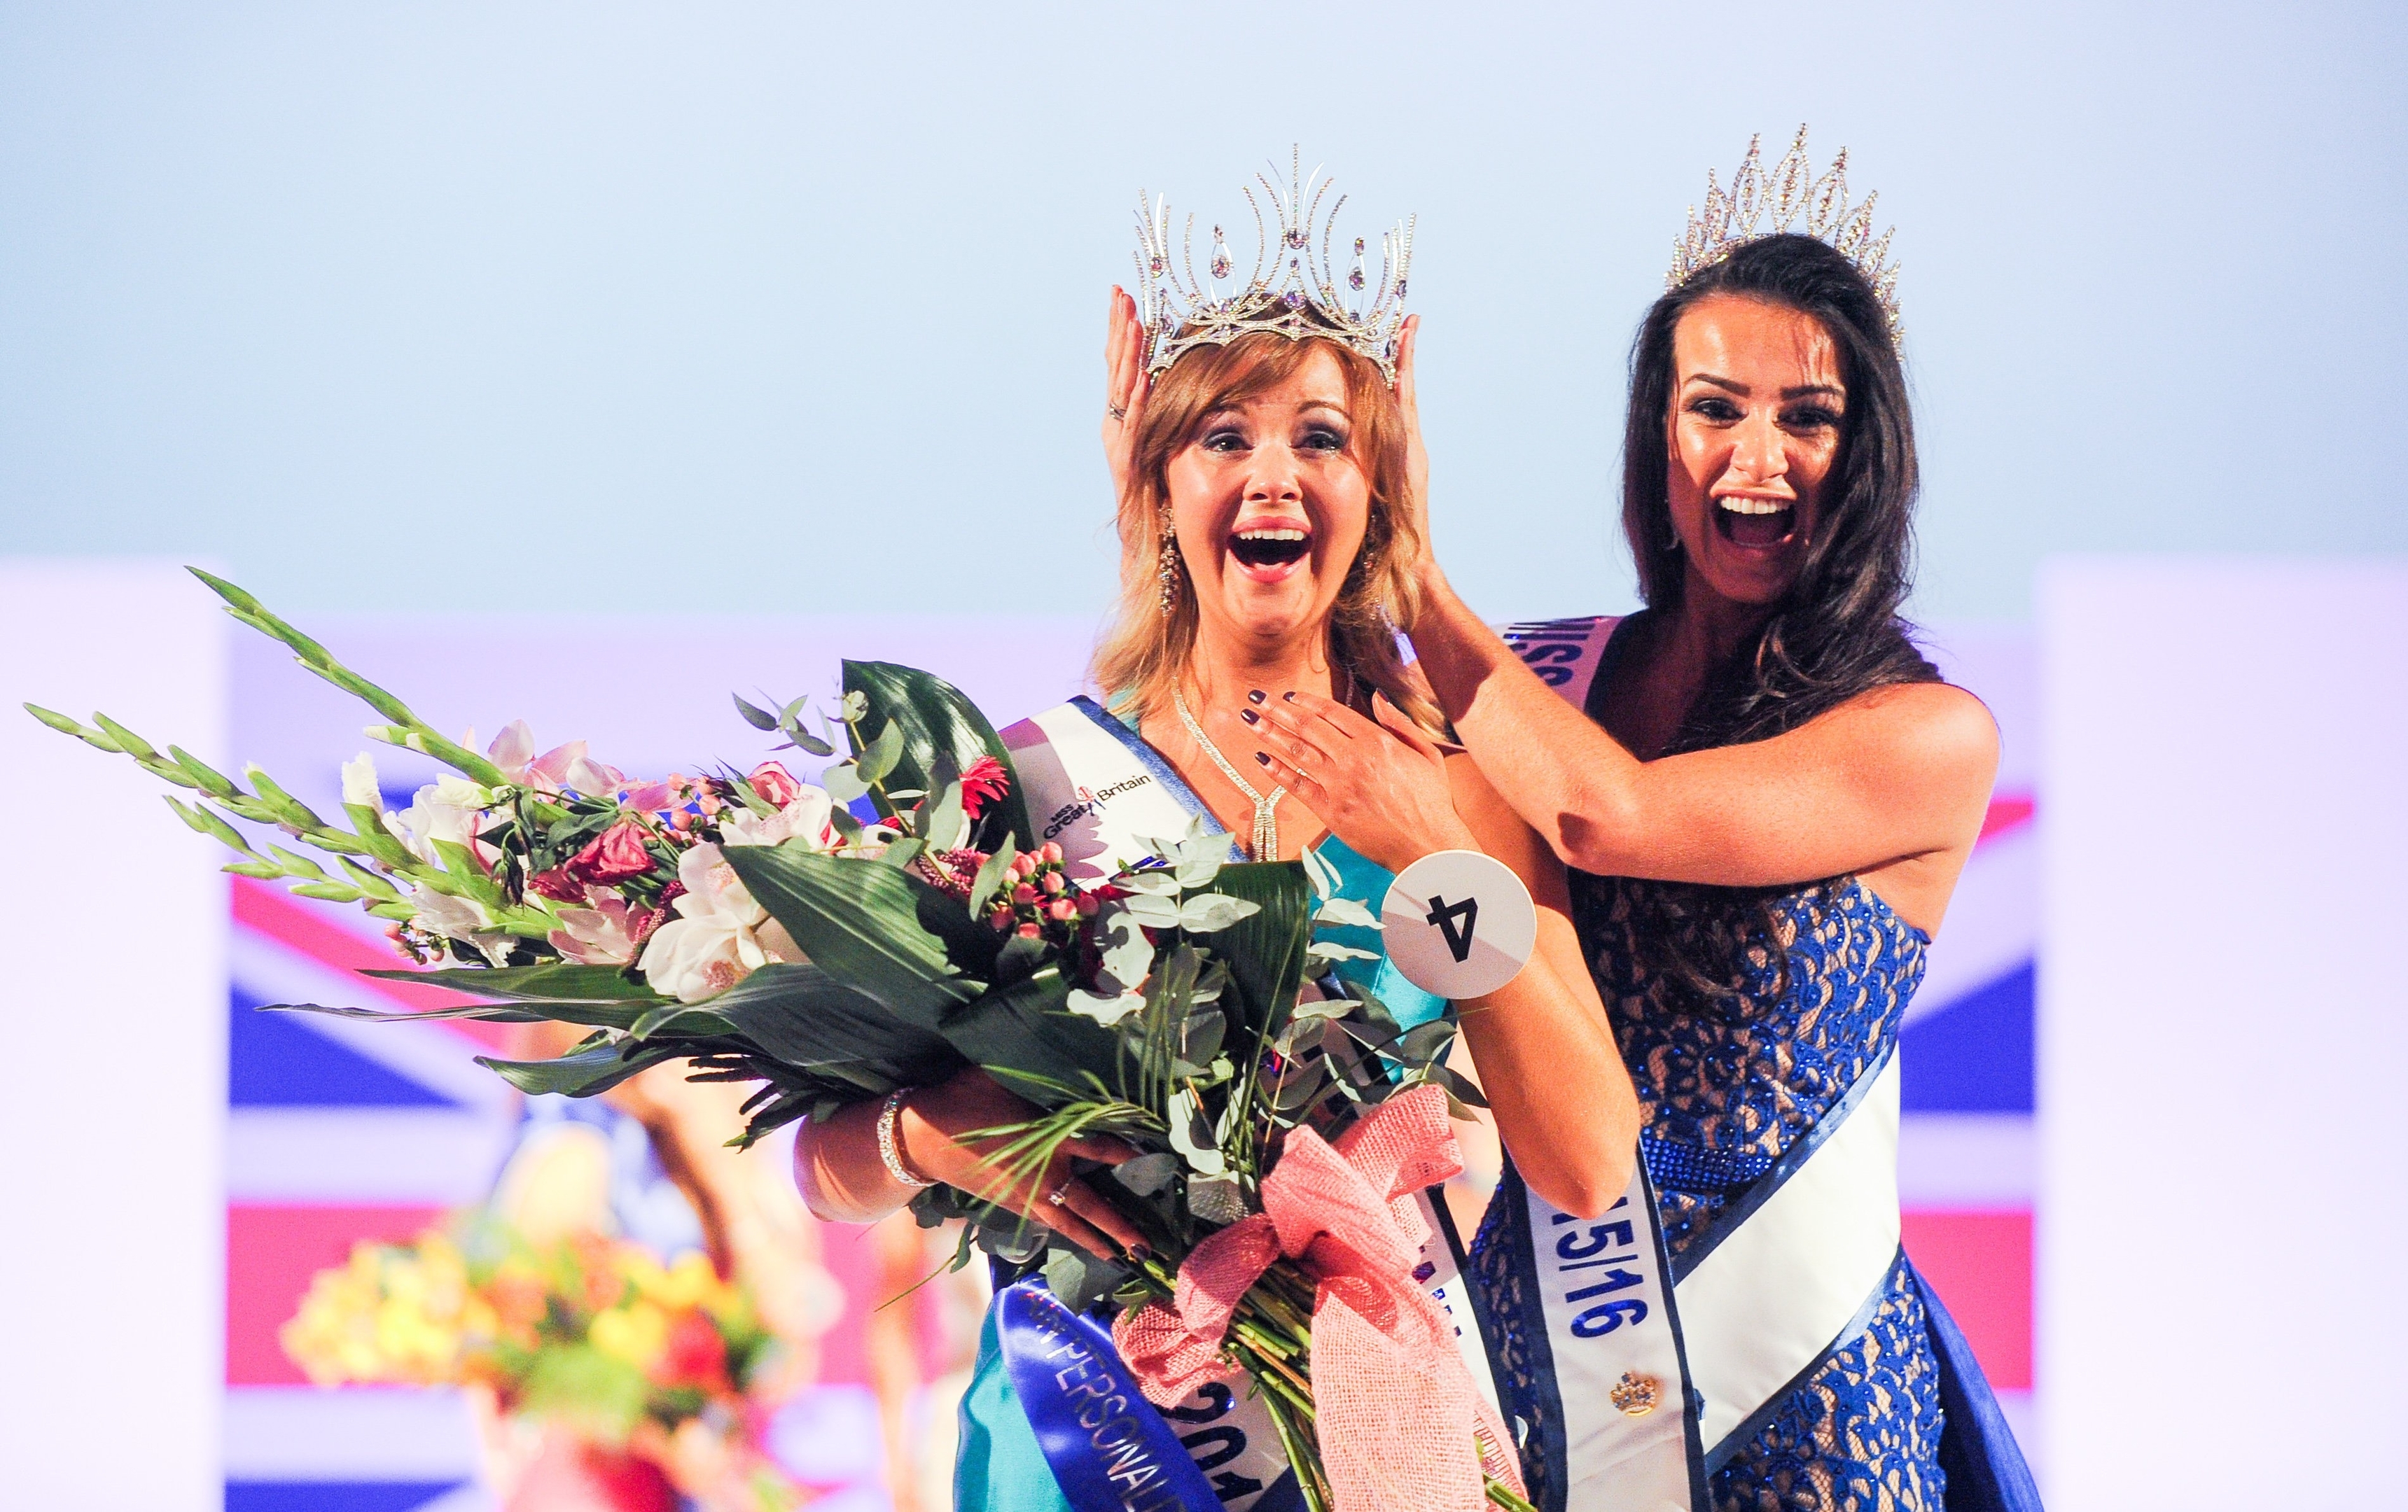 Miss Aberdeen - Ursula Carlton is crowded Miss Great Britain 2016. With Ursula is last years winner, Deone Robertson